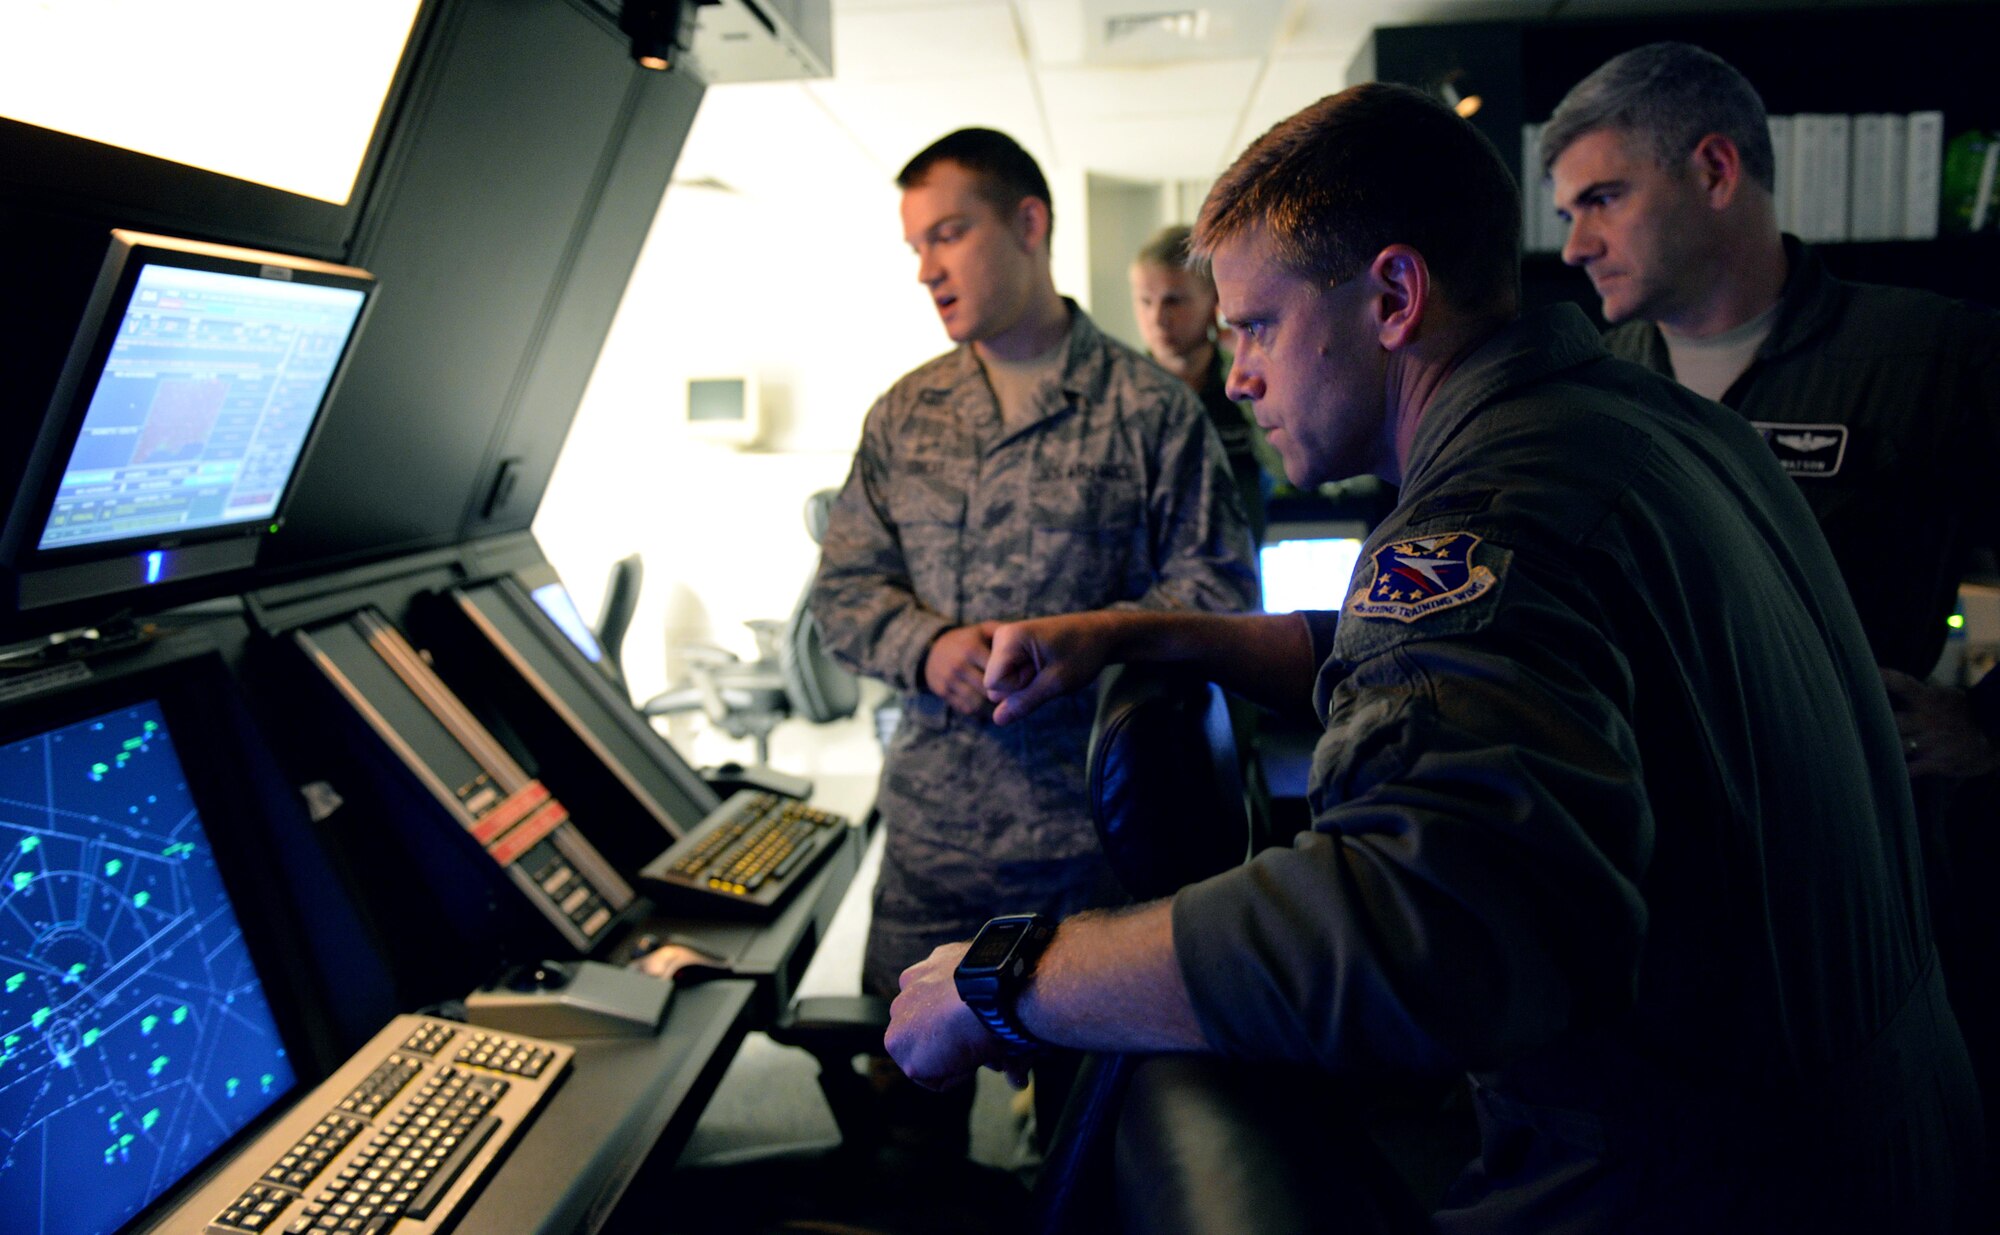 Col. William Denham, 14th Flying Training Wing Vice Commander, is shown the airfield from the perspective of the radar control room July 11, 2017, on Columbus Air Force Base, Mississippi. The Radar Approach Control room is where Air Traffic Controllers direct and coordinate flight paths for aircraft in flight.